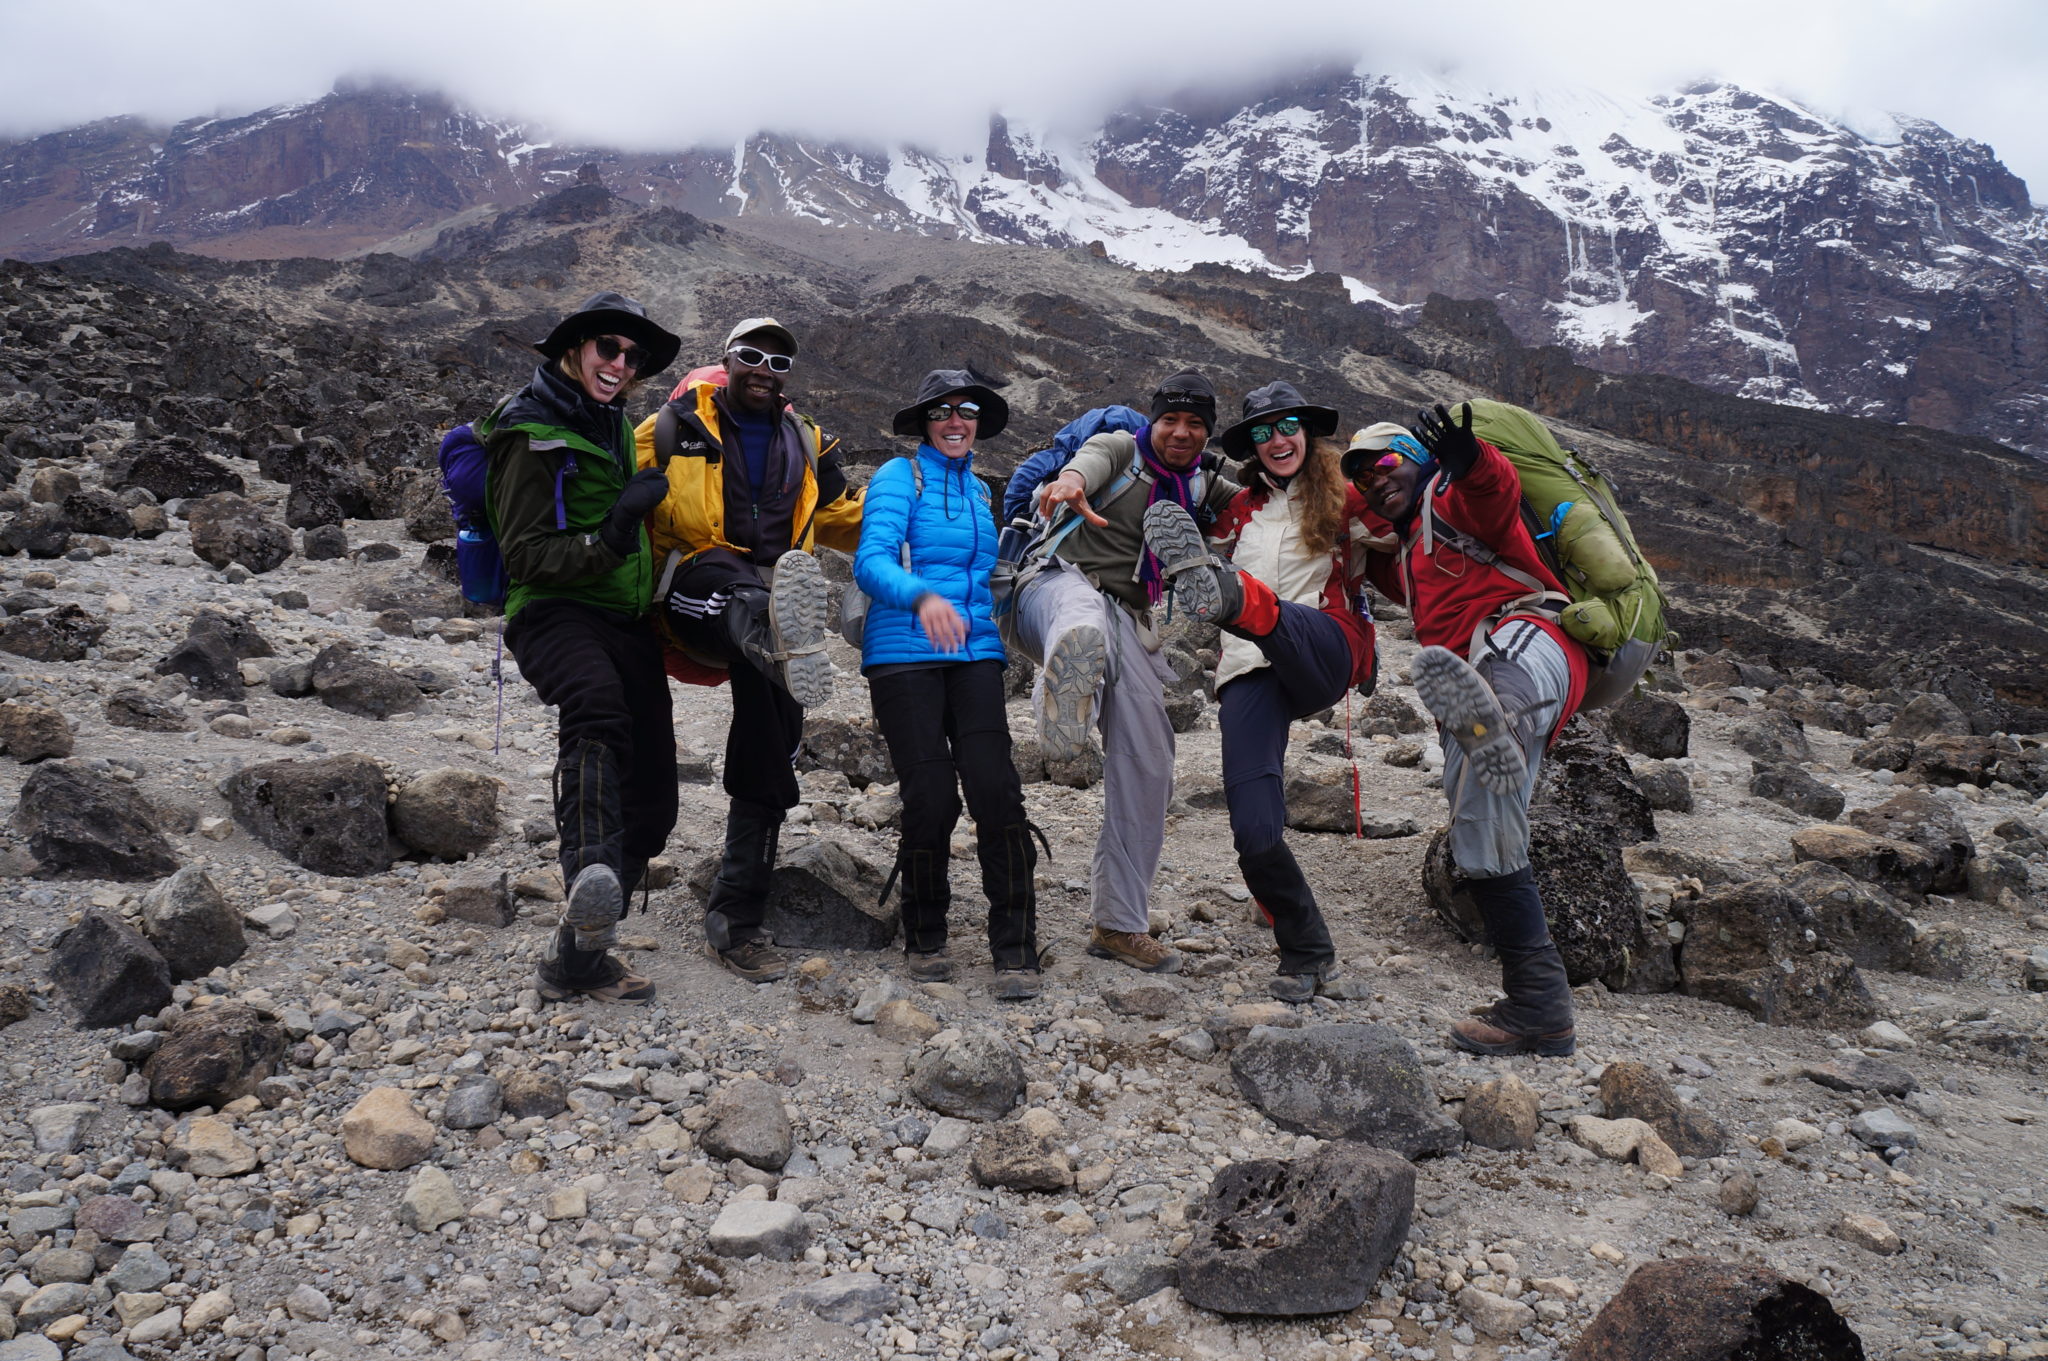 Natalie H. and her companions getting silly on Kili